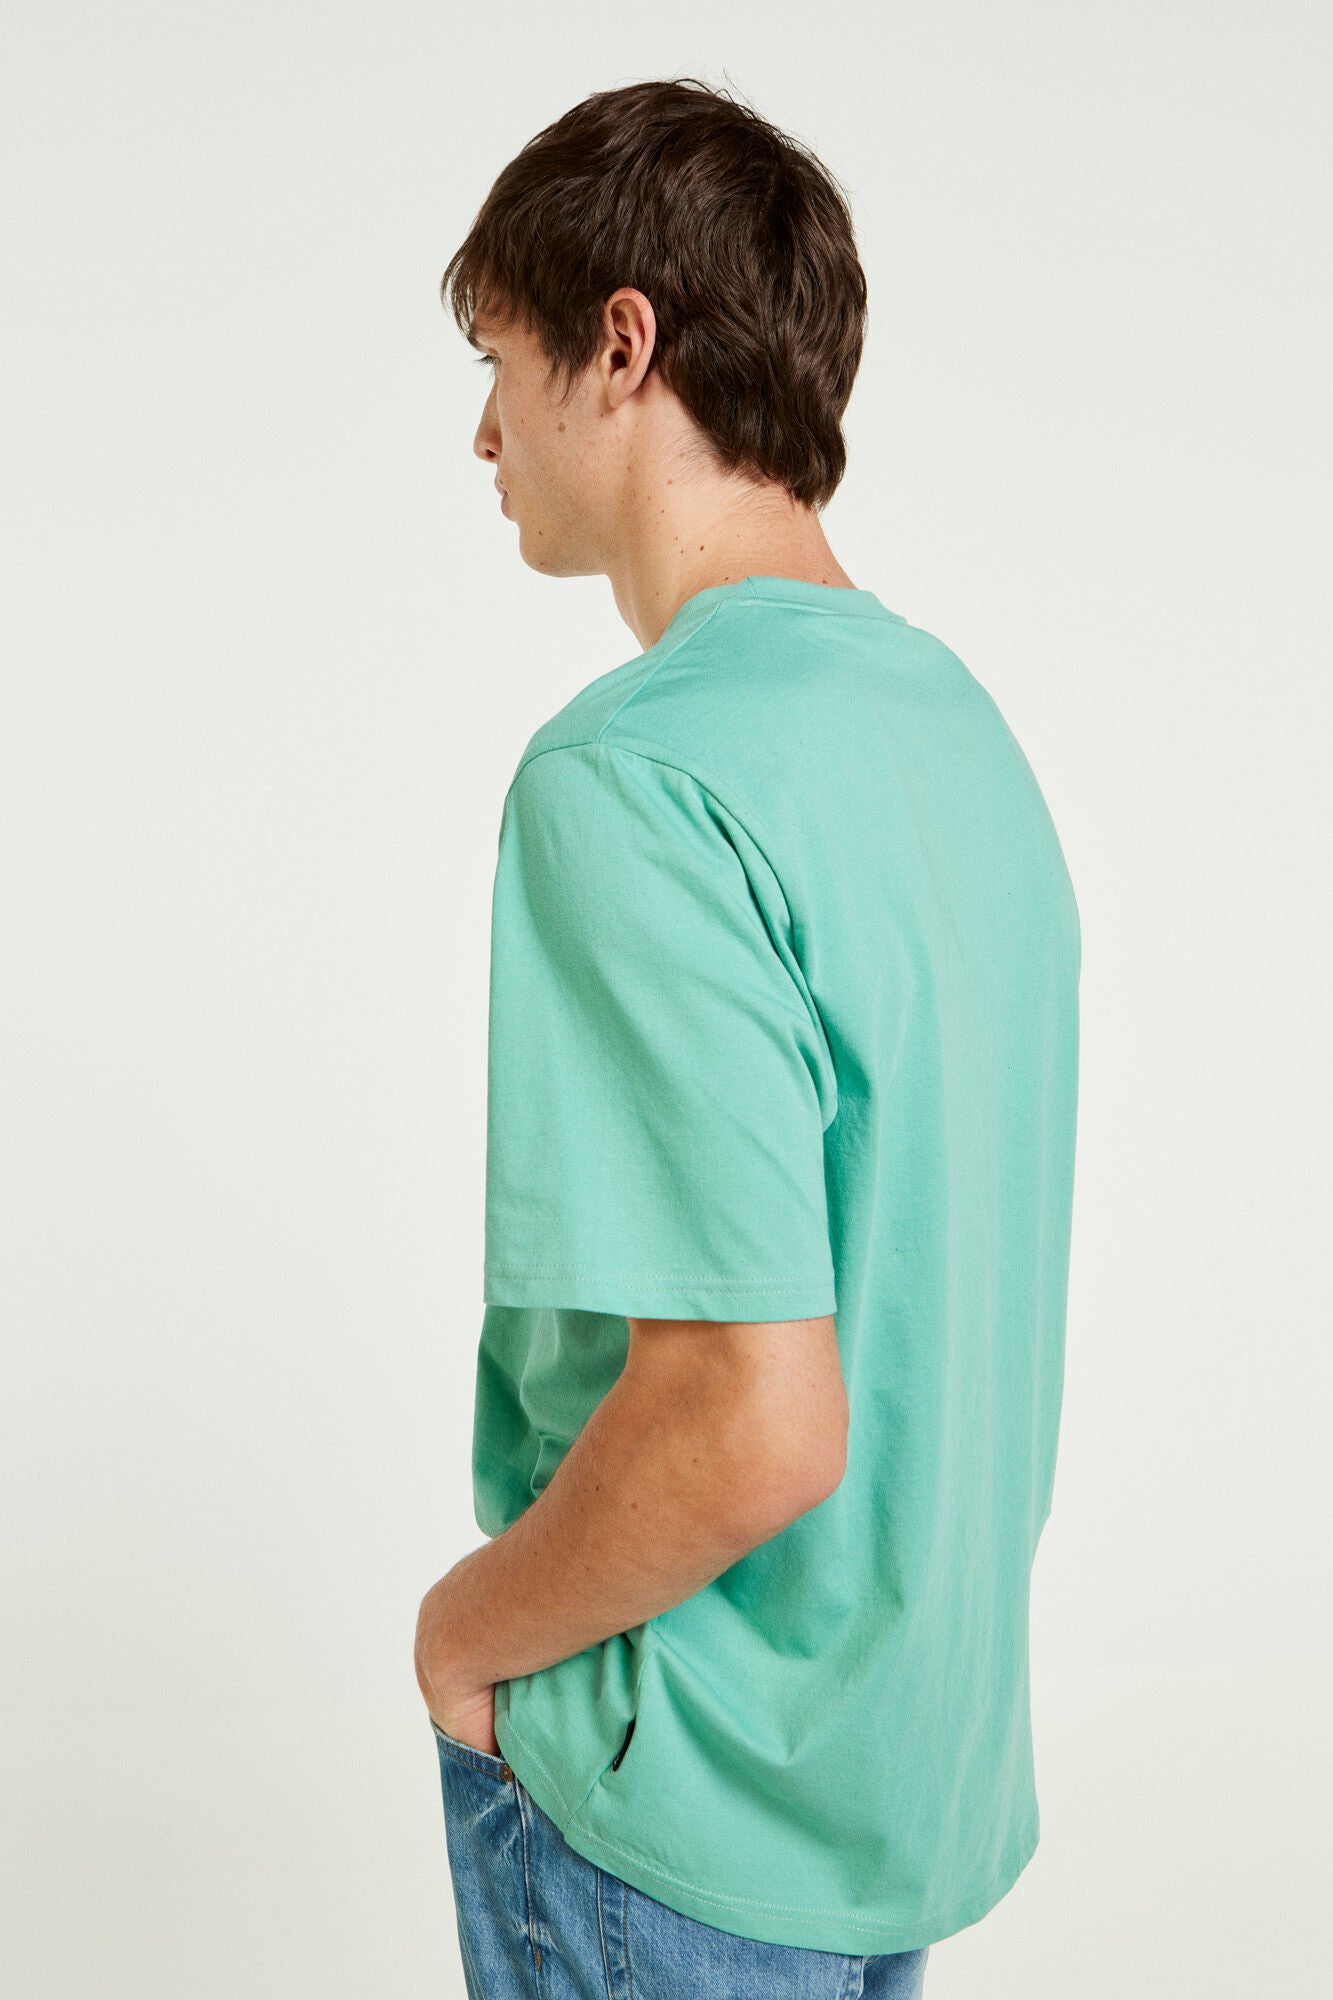 Mint Blue Overbold Printed T-shirt